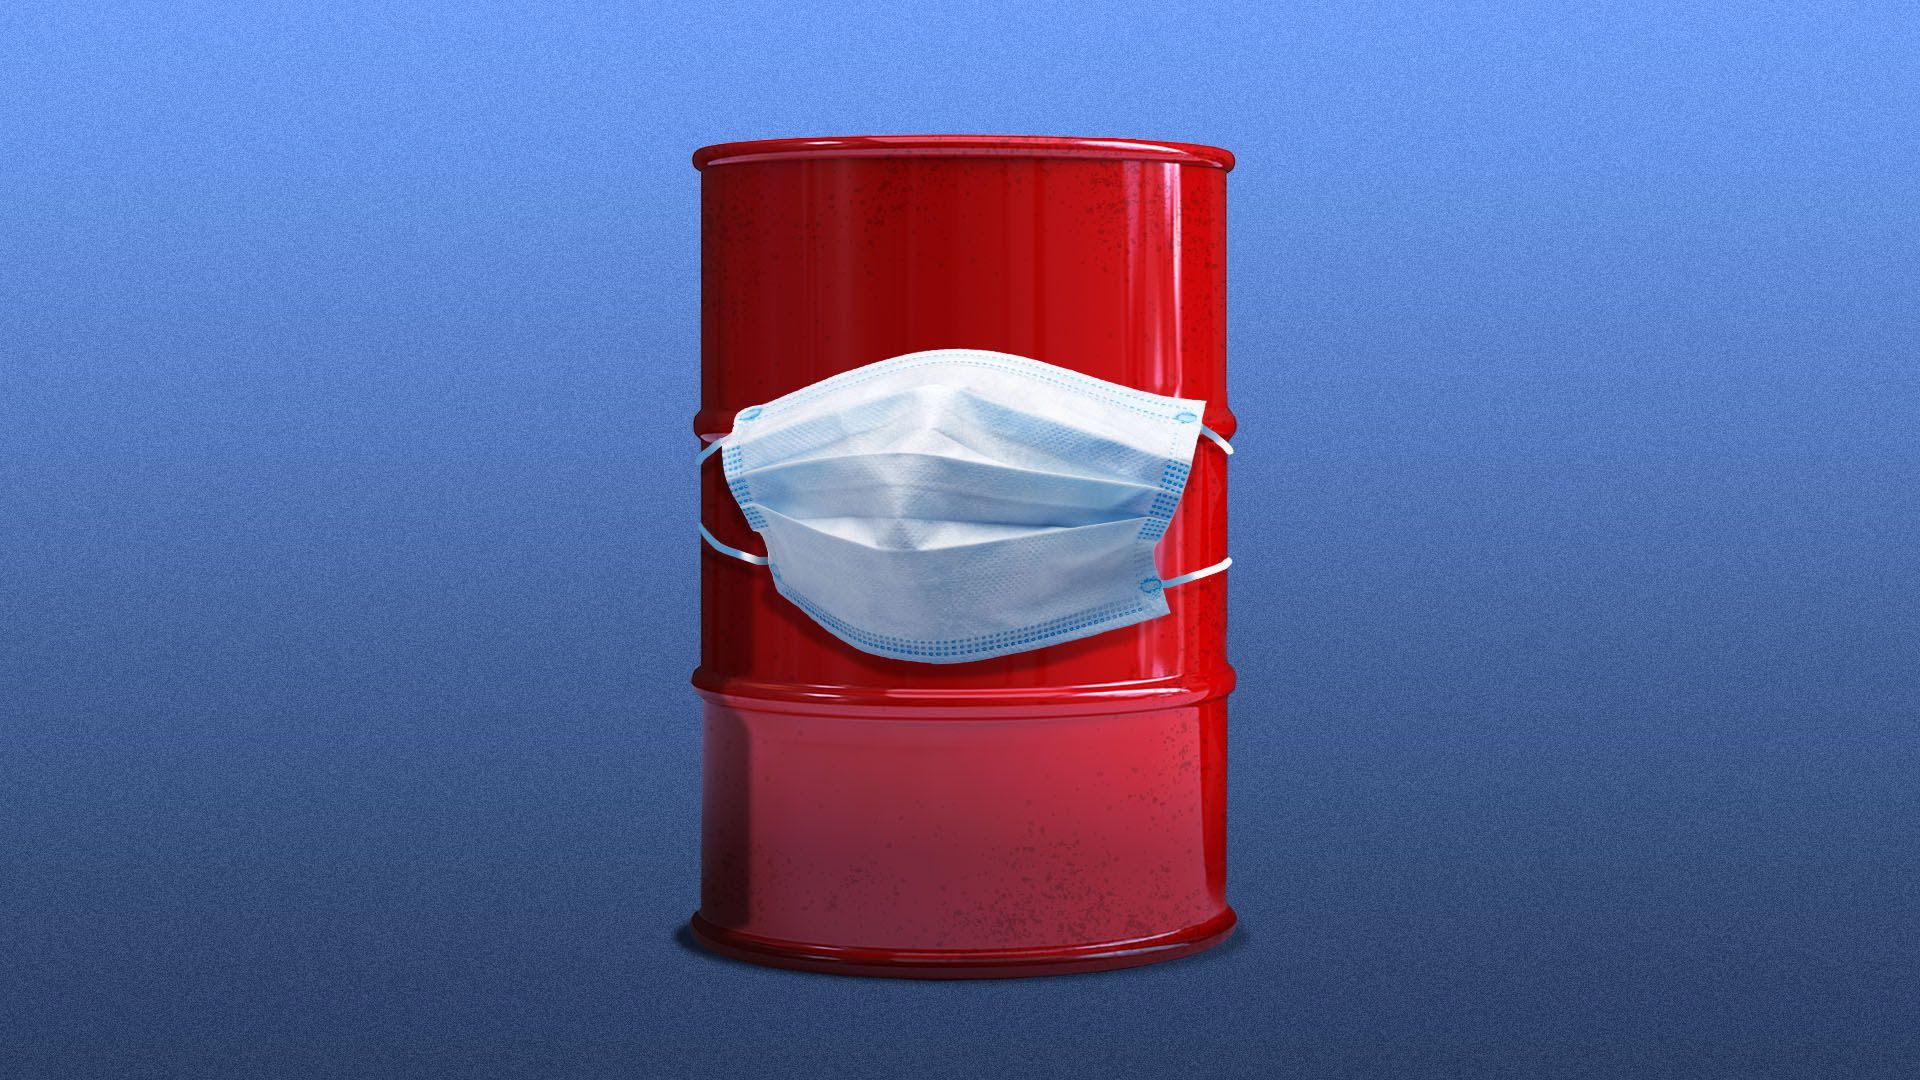 Illustration of an oil barrel wearing a face mask